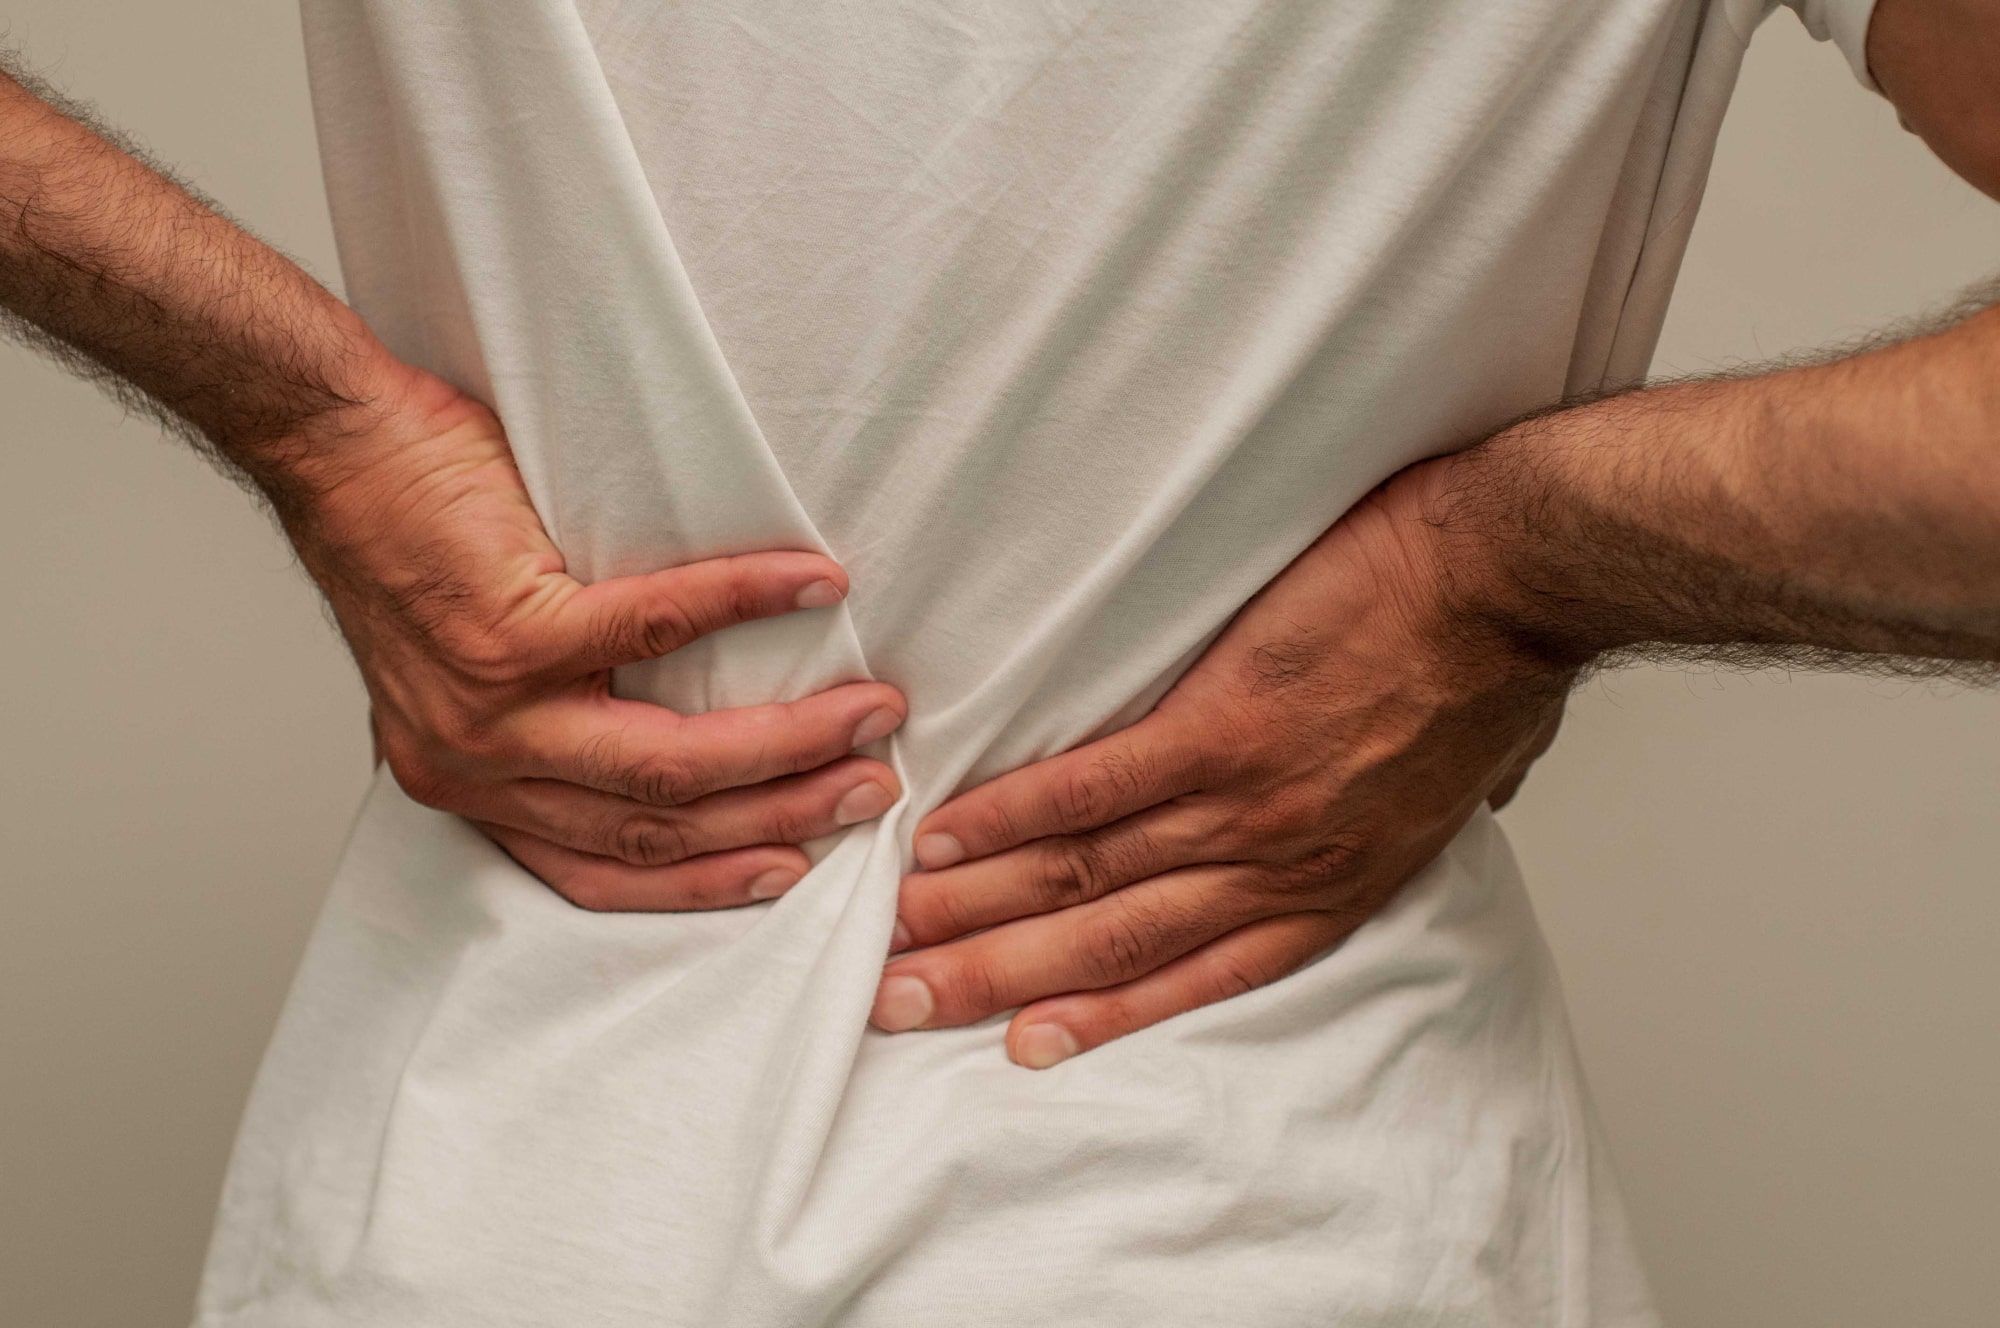 Chiropractic treatment for back pain